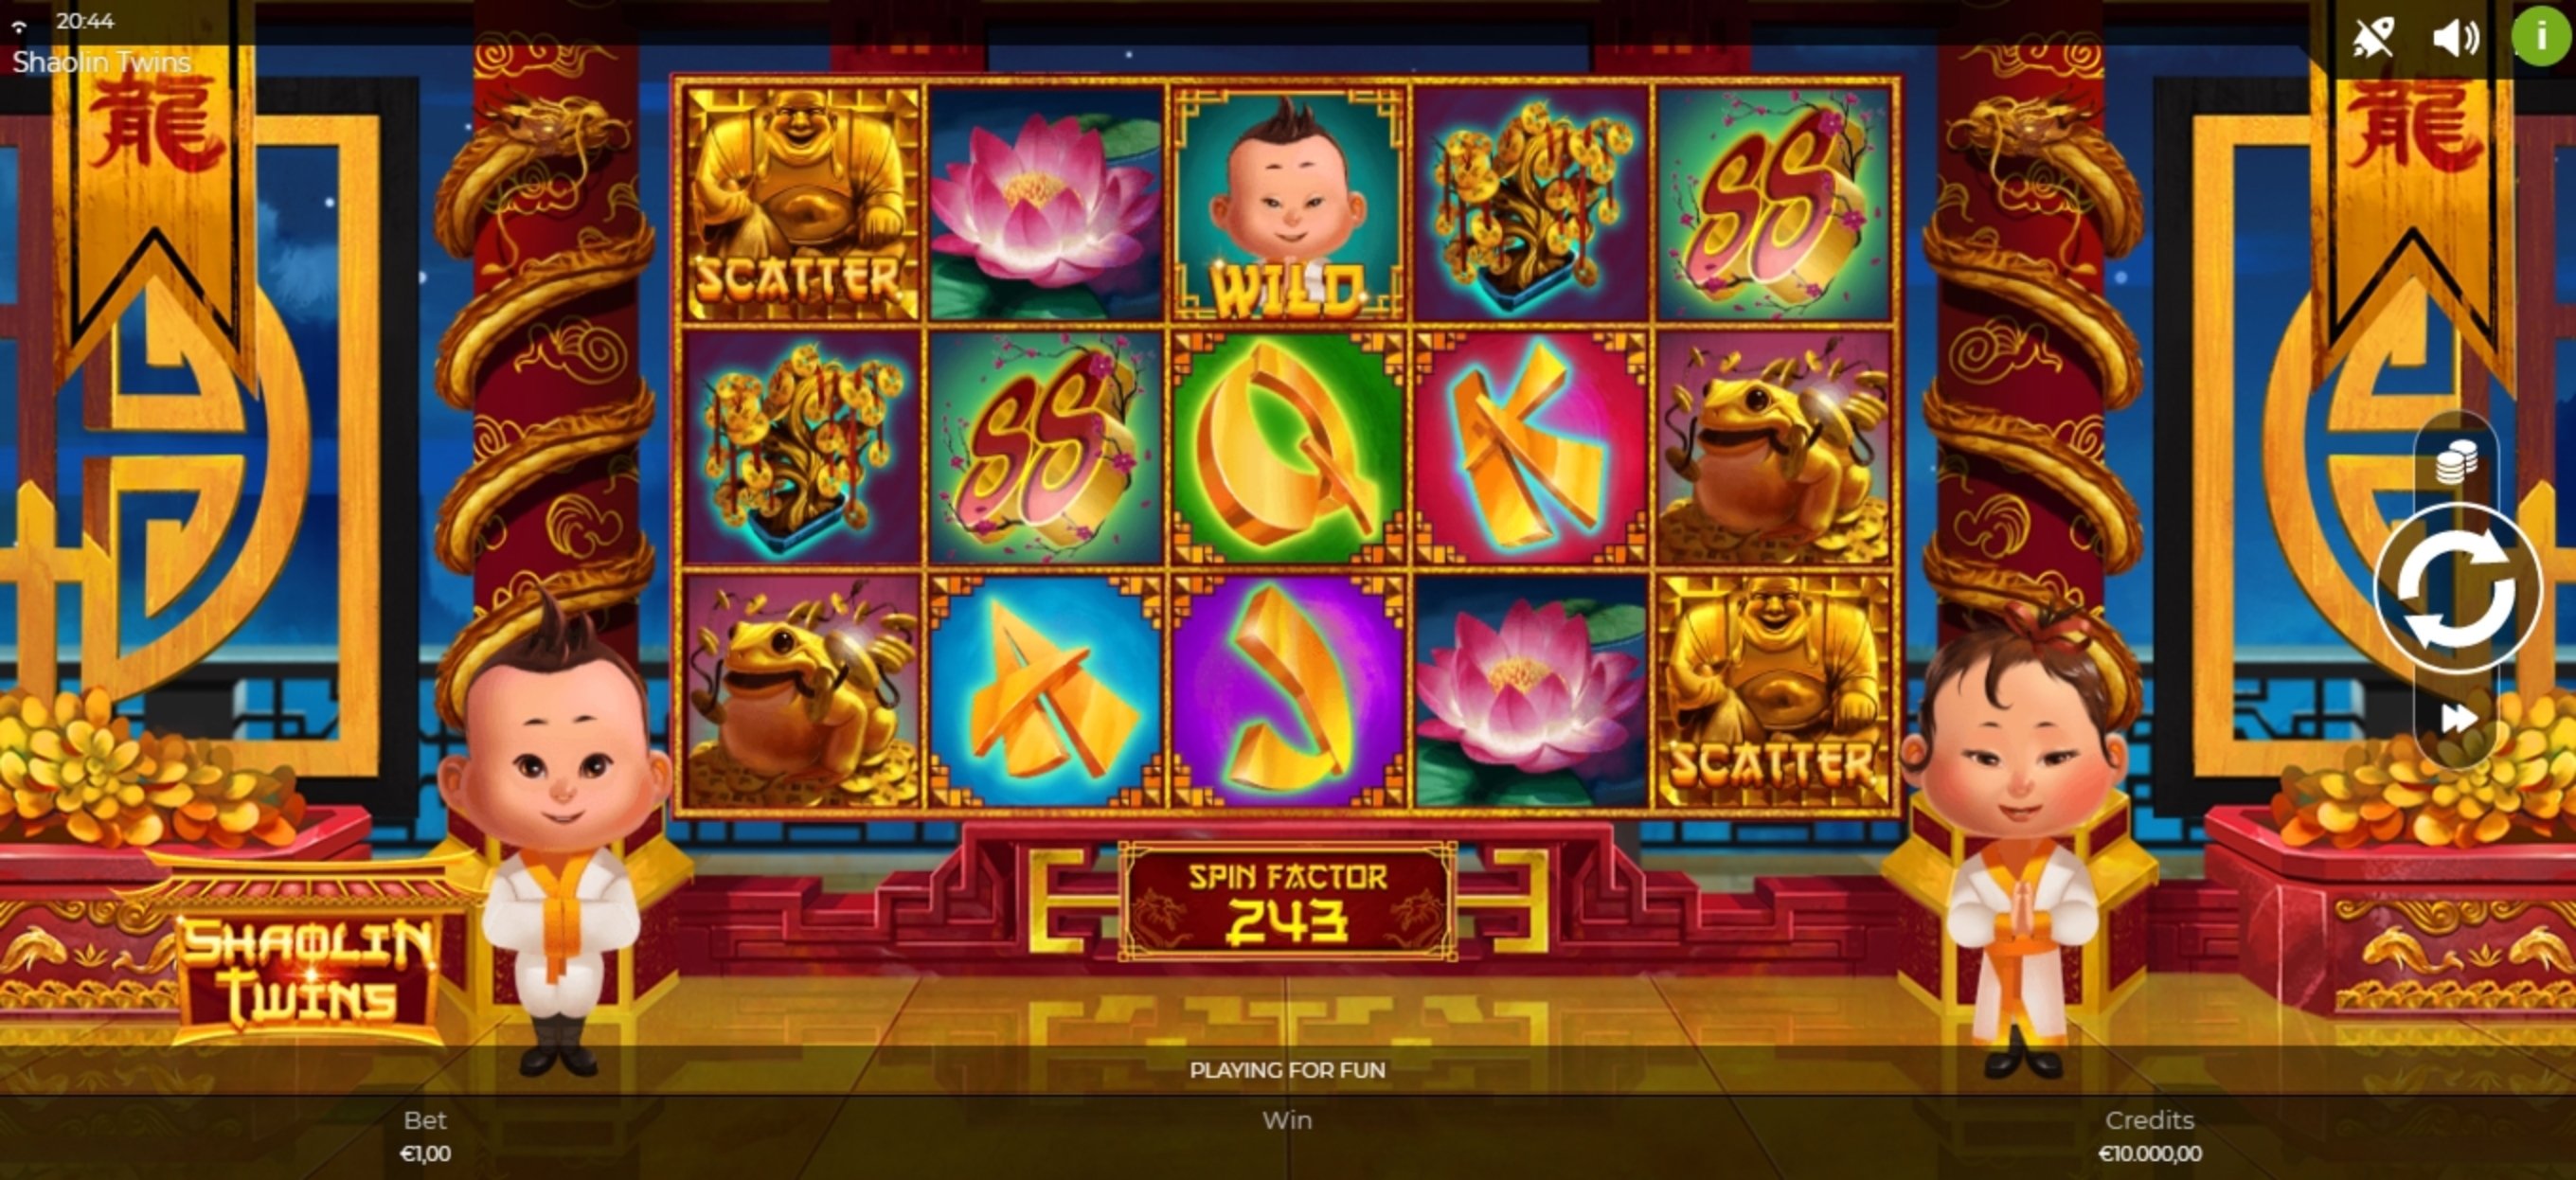 Reels in Shaolin Twins Slot Game by Spinmatic